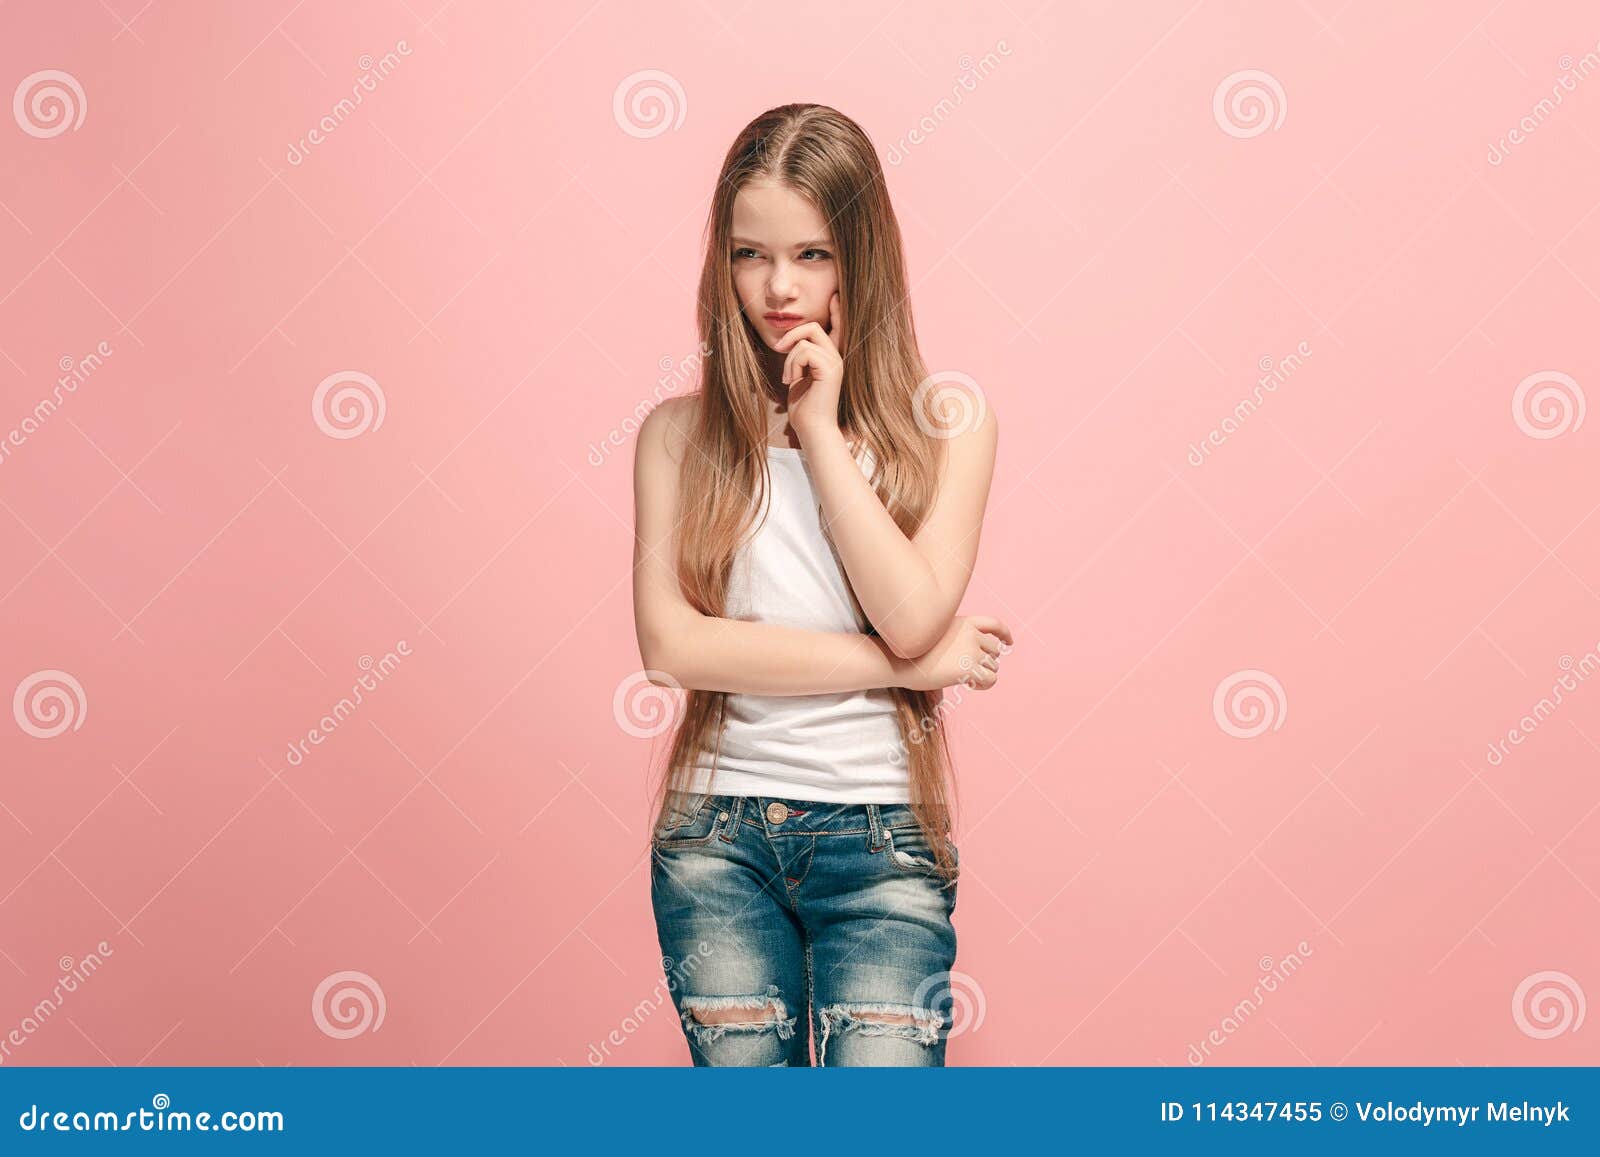 Young Serious Thoughtful Teen Girl. Doubt Concept. Stock Image ...